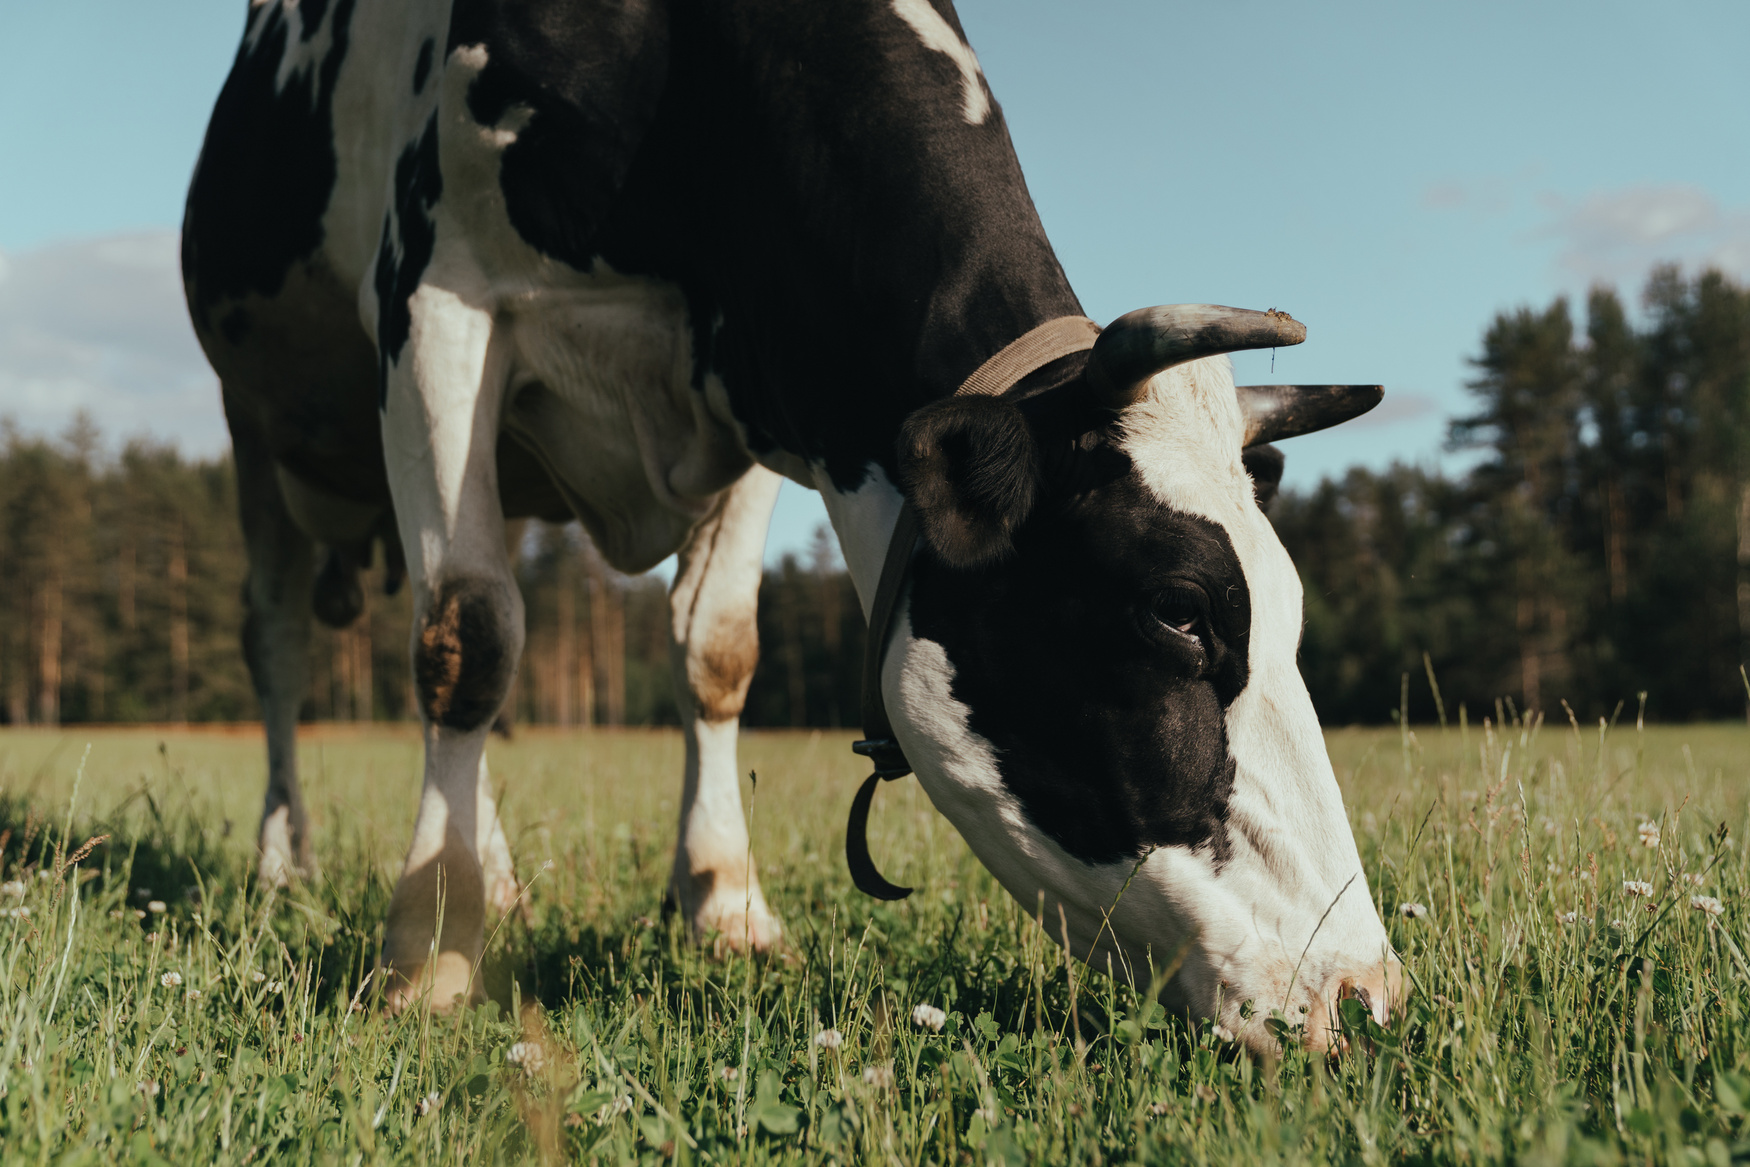 Black and White Cow on Green Grass Field